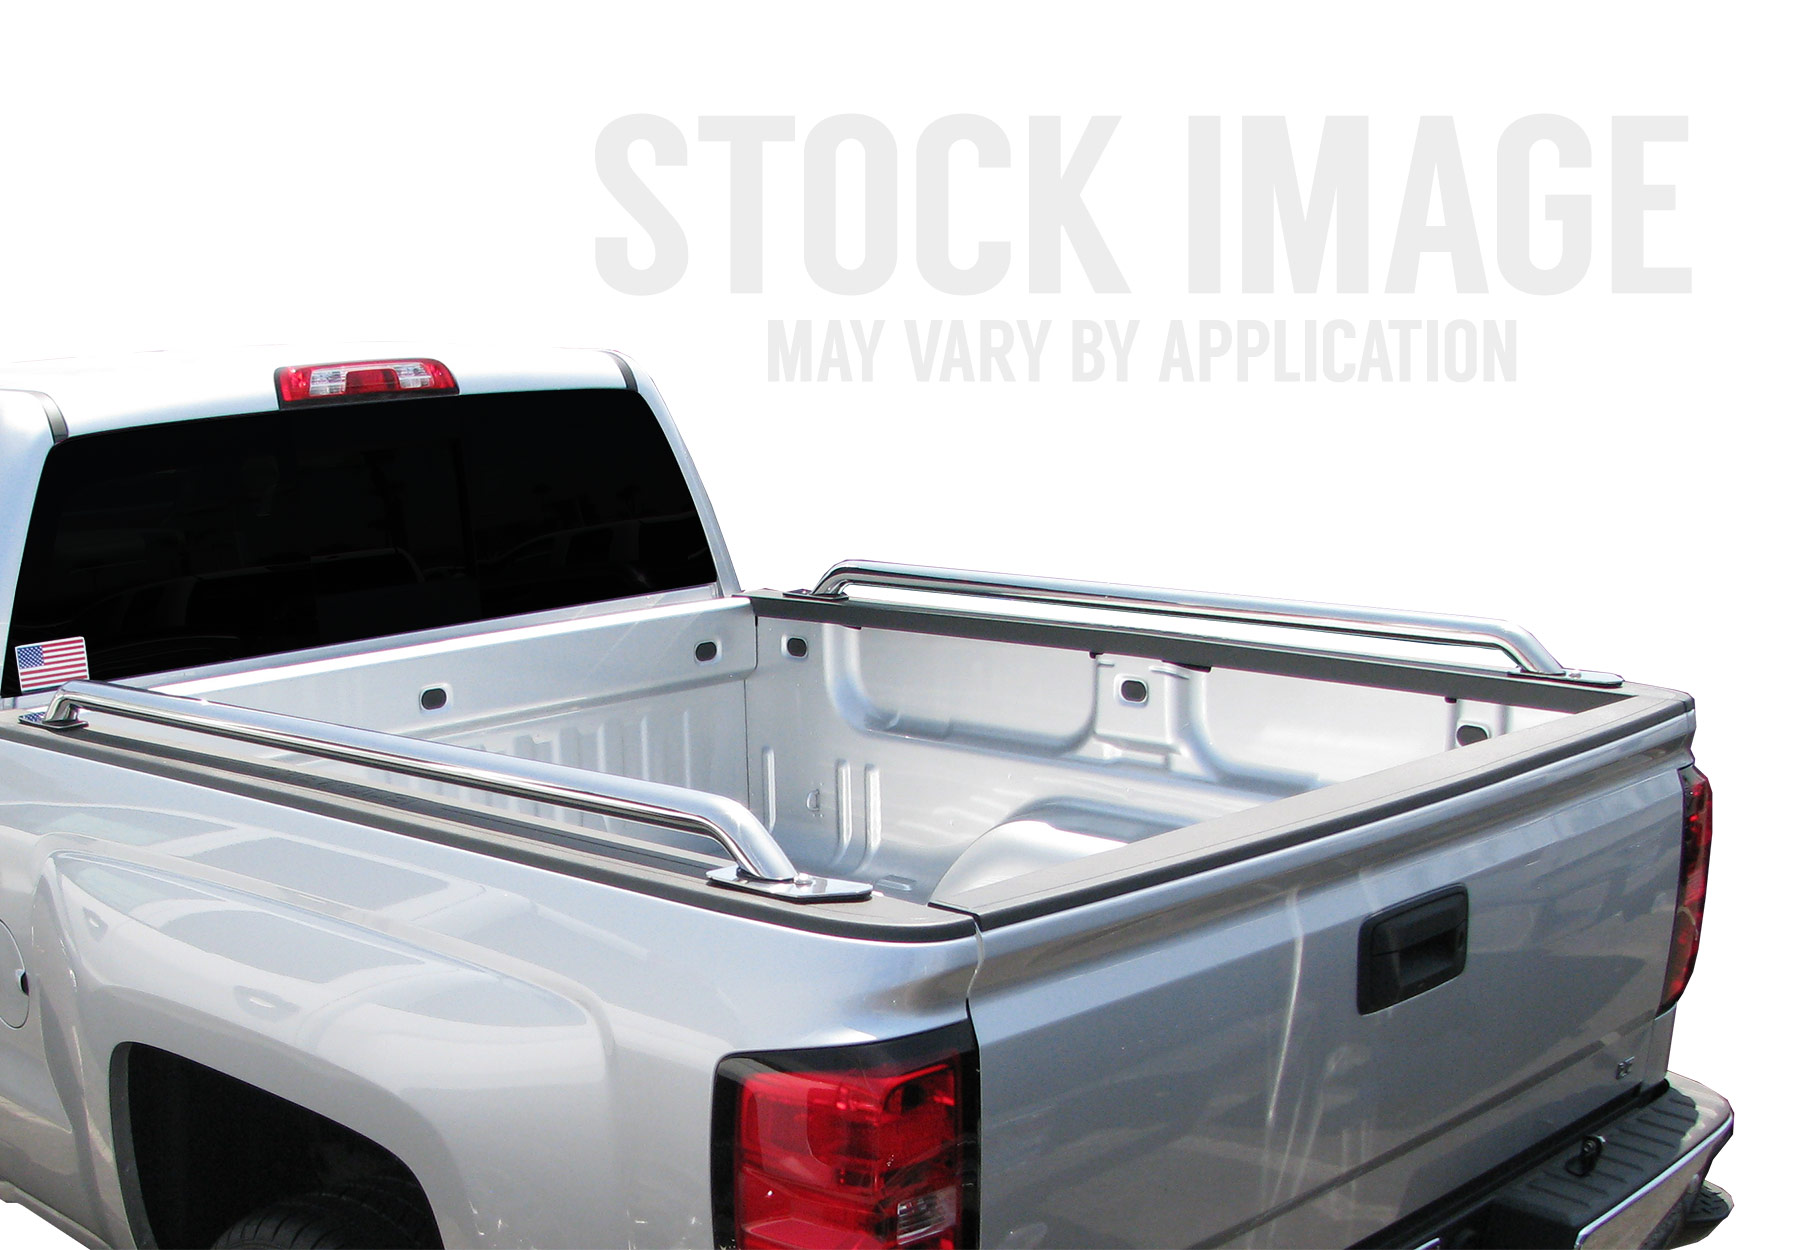 Stainless Steel Truck Side Bed Rails 07-On W/New Body Style Bed 6-1/2 Steelcraft 602147 07-13 Chevy Silverado/Sierra 1500/2500/3500 6ft